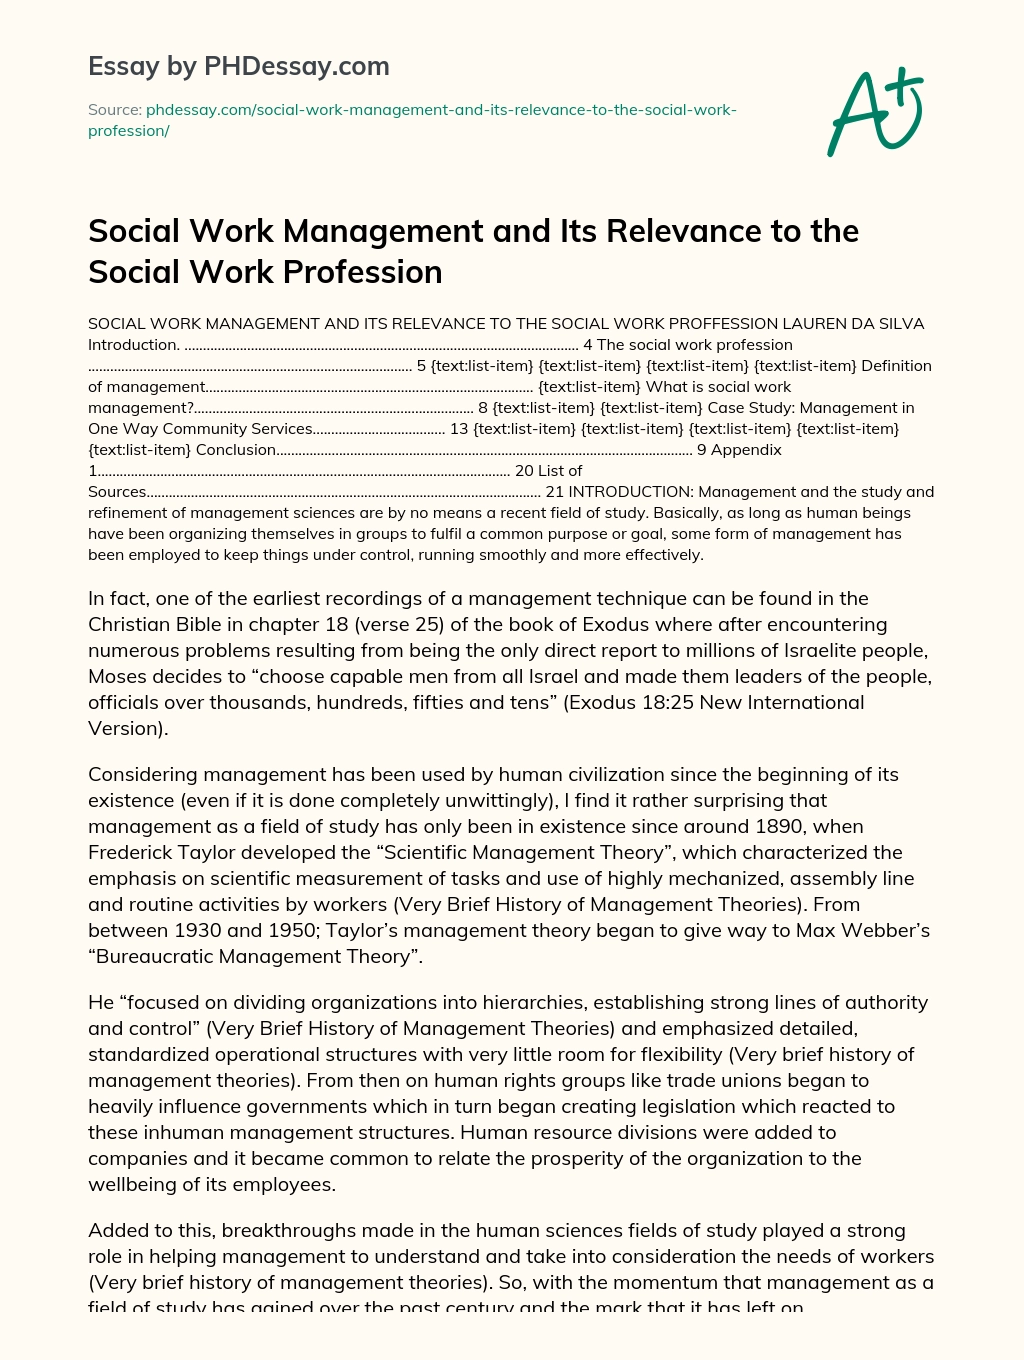 Social Work Management and Its Relevance to the Social Work Profession essay